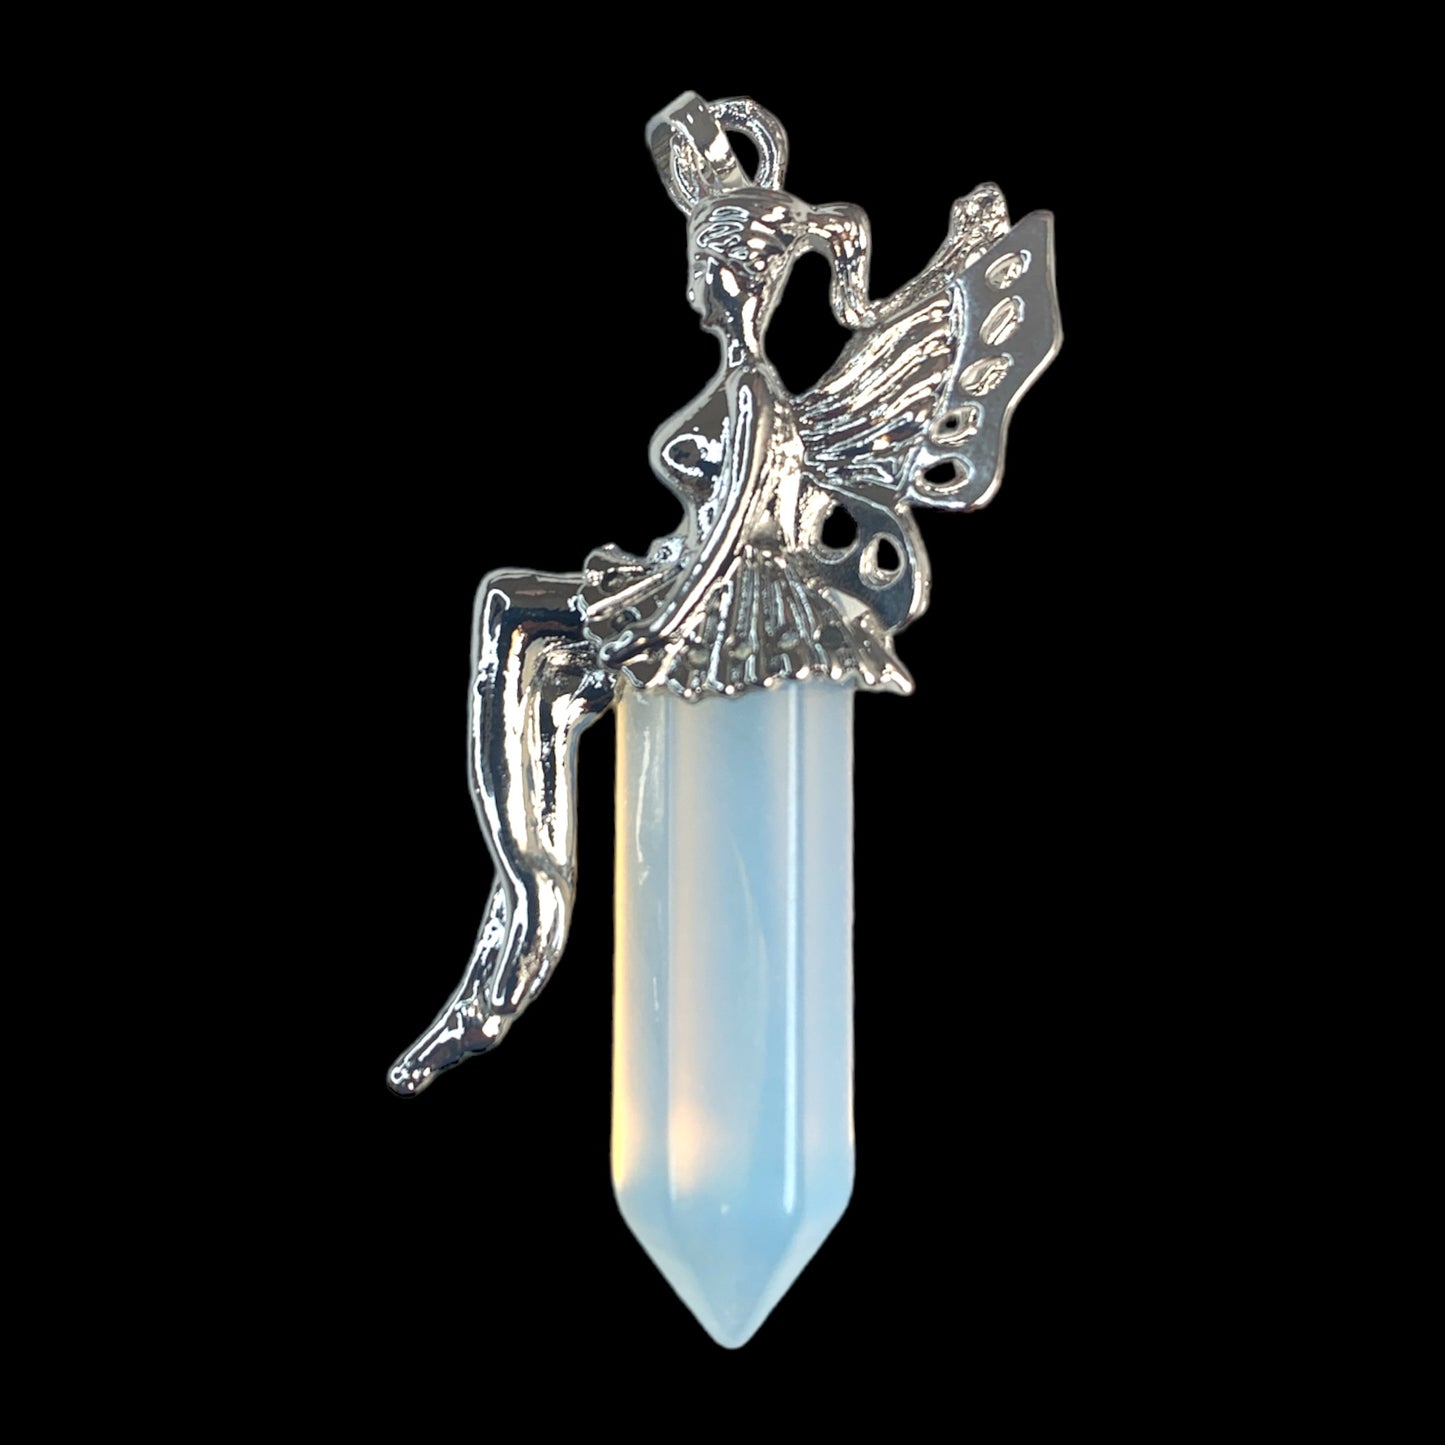 Fairy Design Terminated Pendant - Opalite - Silver Color Plated Metal - 50mm - China - NEW1022